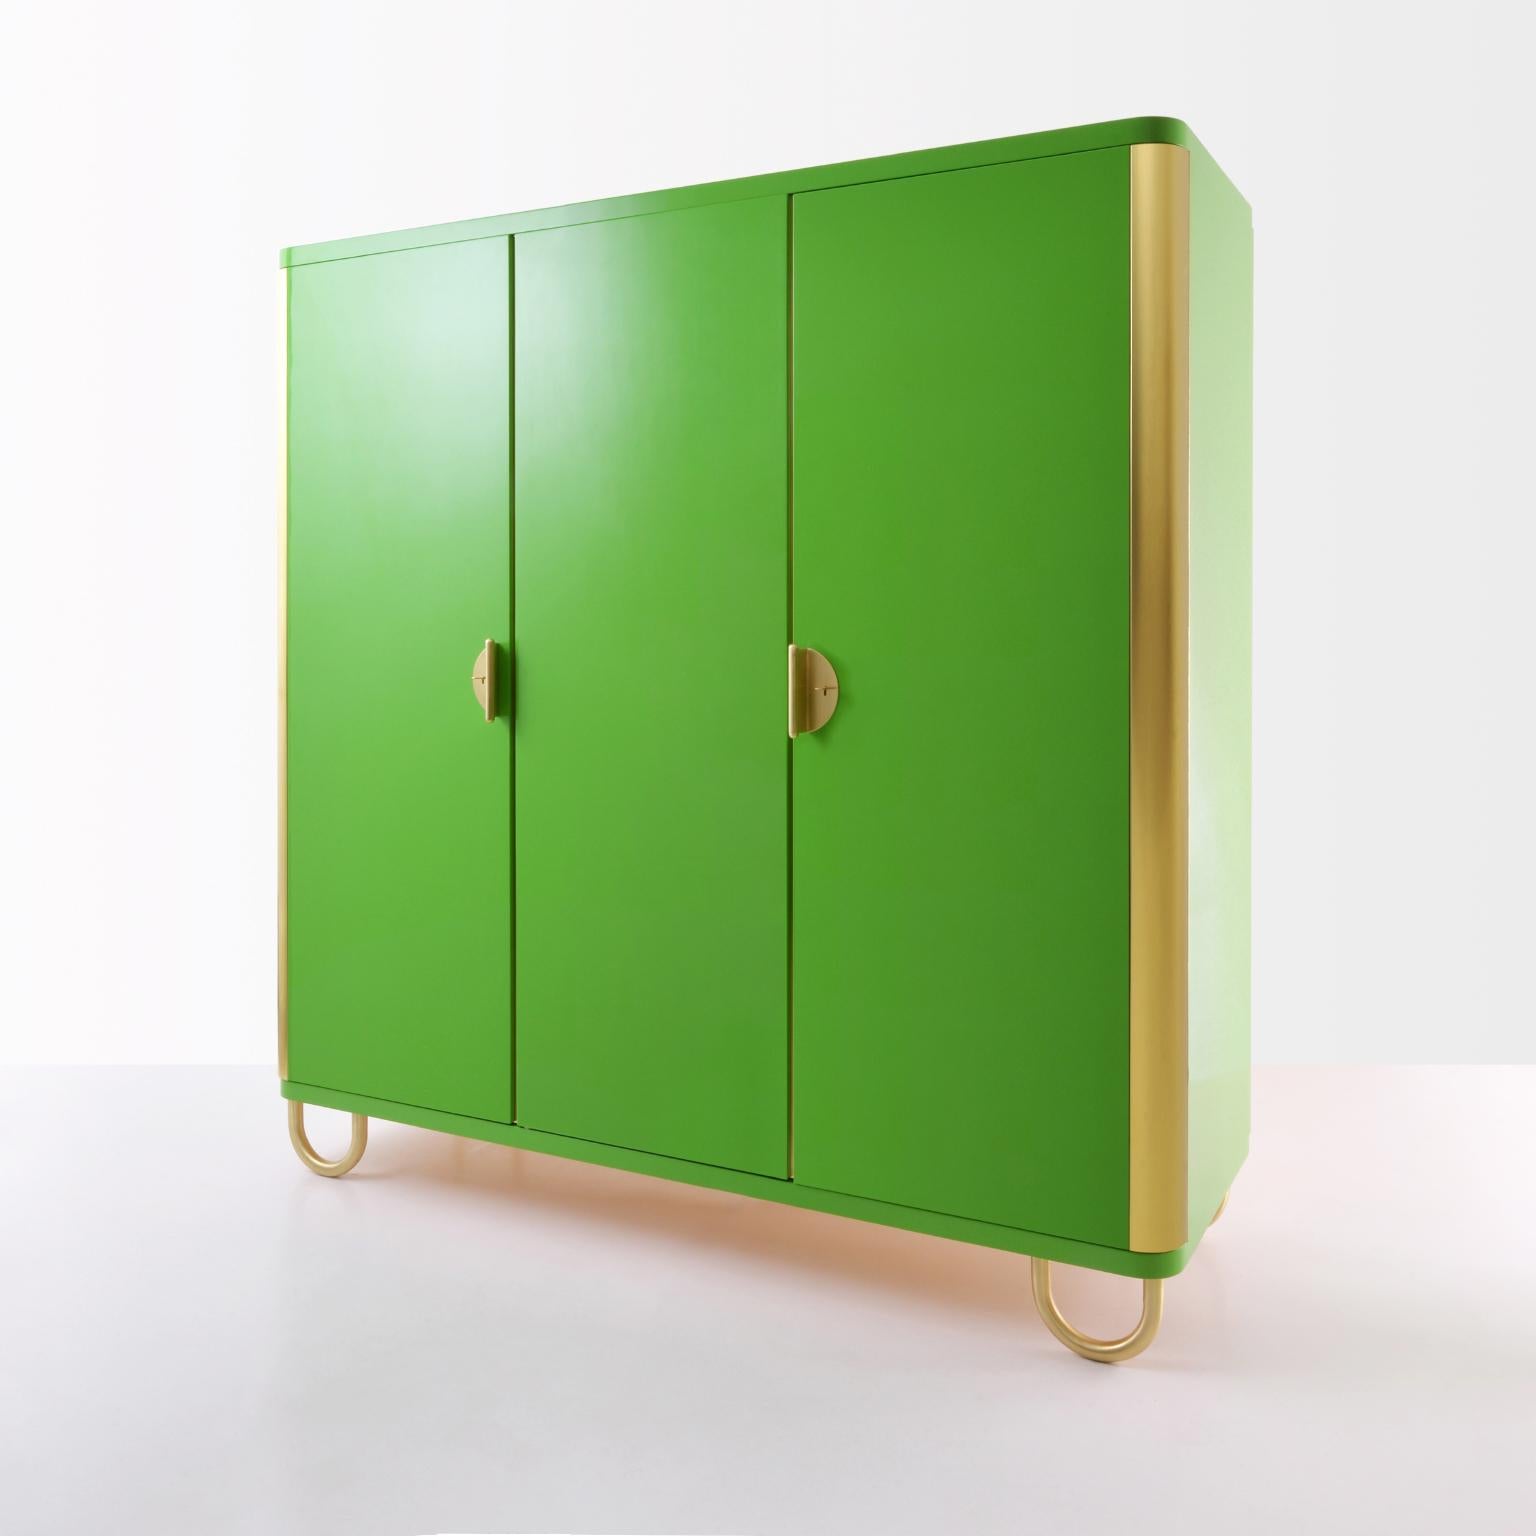 Custom made three-door wardrobe / armoire, designed and manufactured by GMD Berlin, exclusively presented in our Rudolf Vichr Collection.

These high-quality, handmade furniture in a Classic, timeless design is made from selected materials according